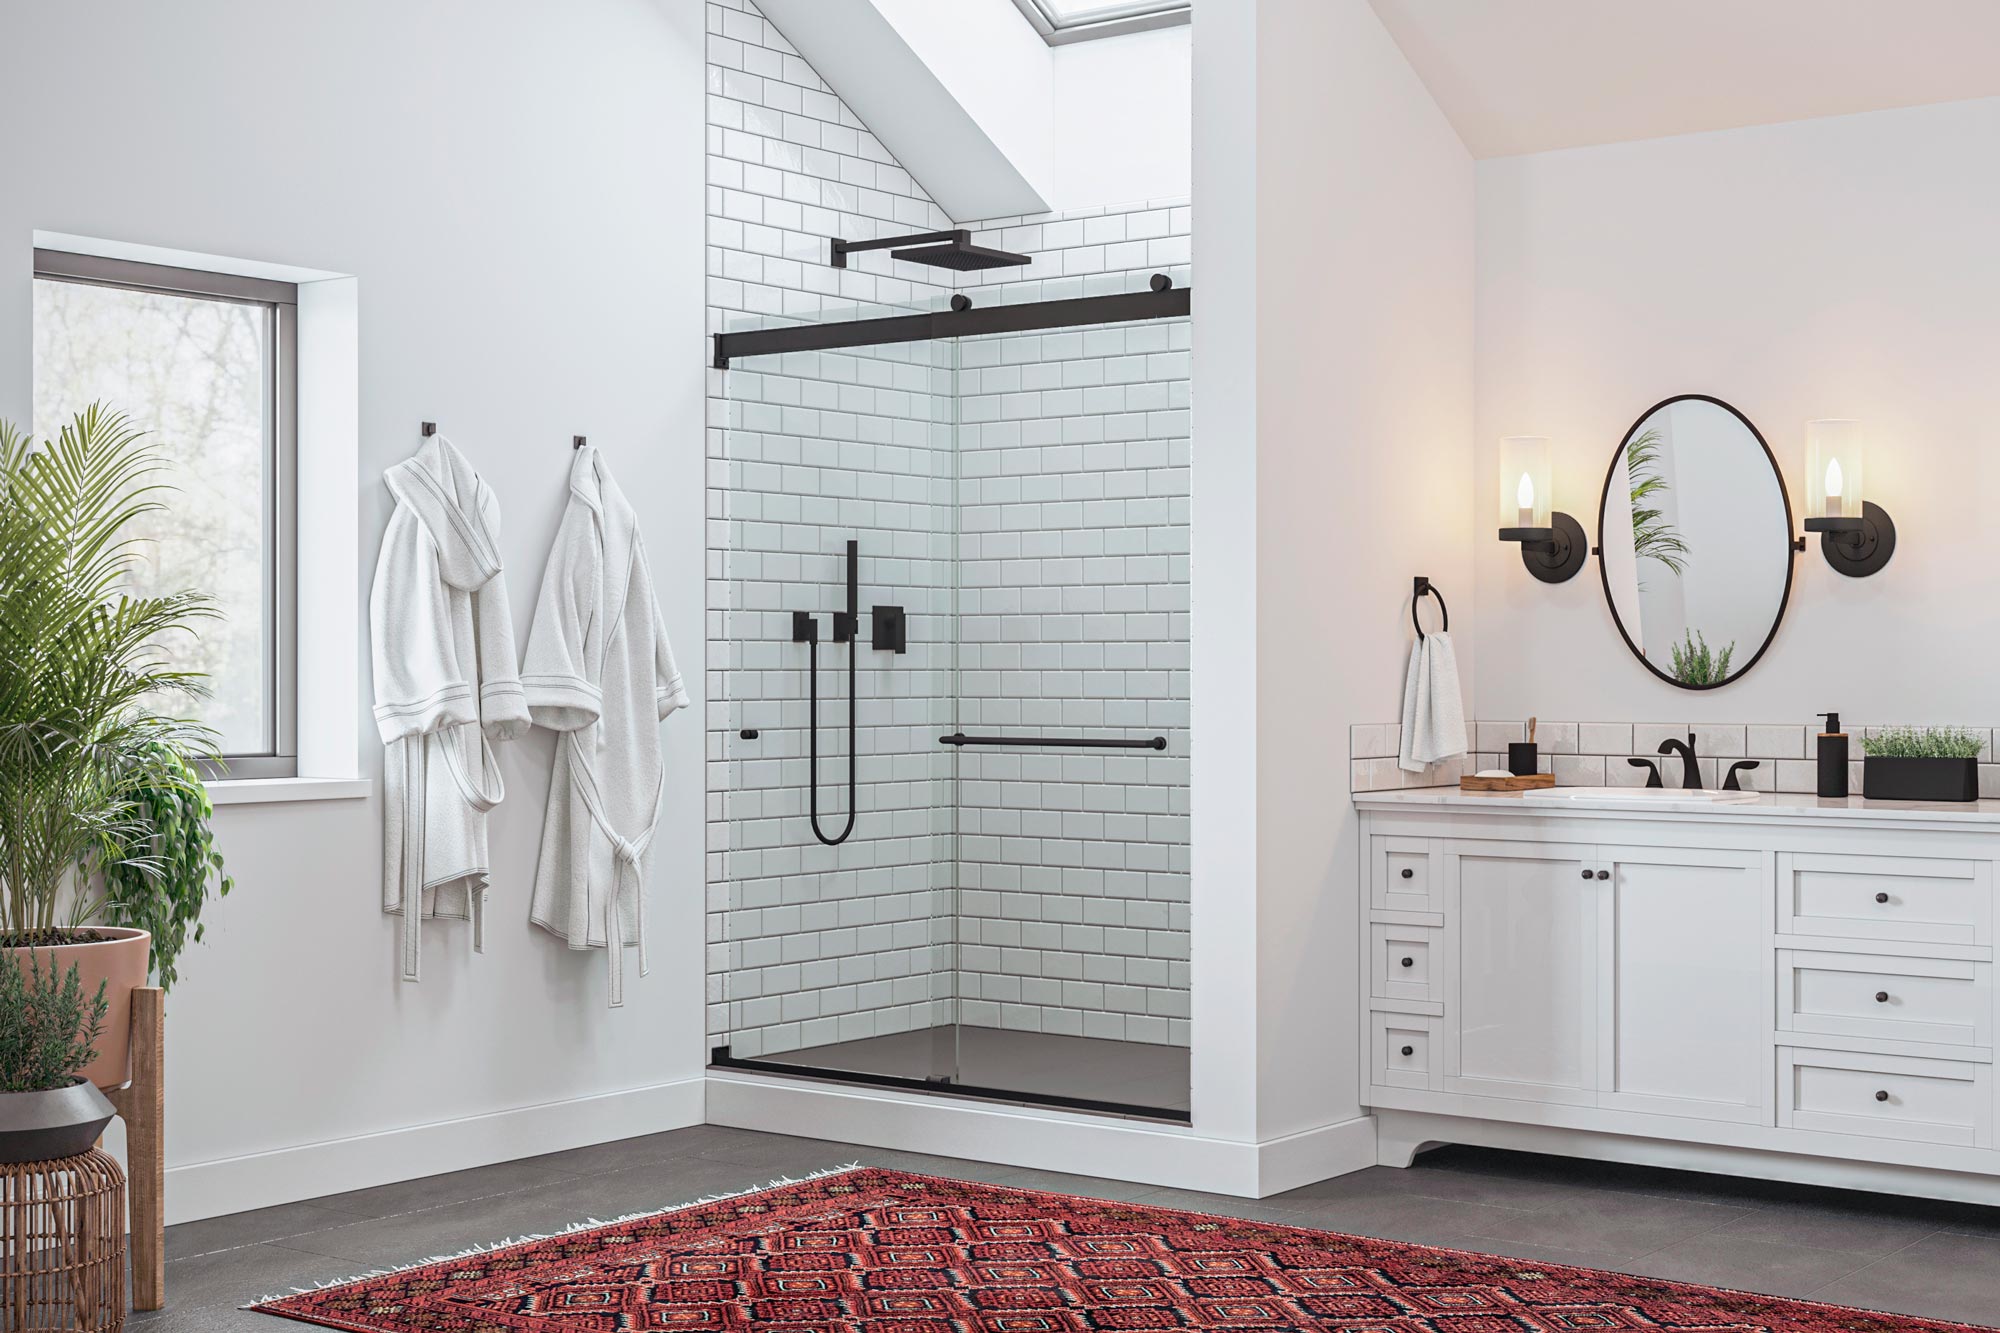 How the Rotolo Lux Provides Ultramodern Shower Design